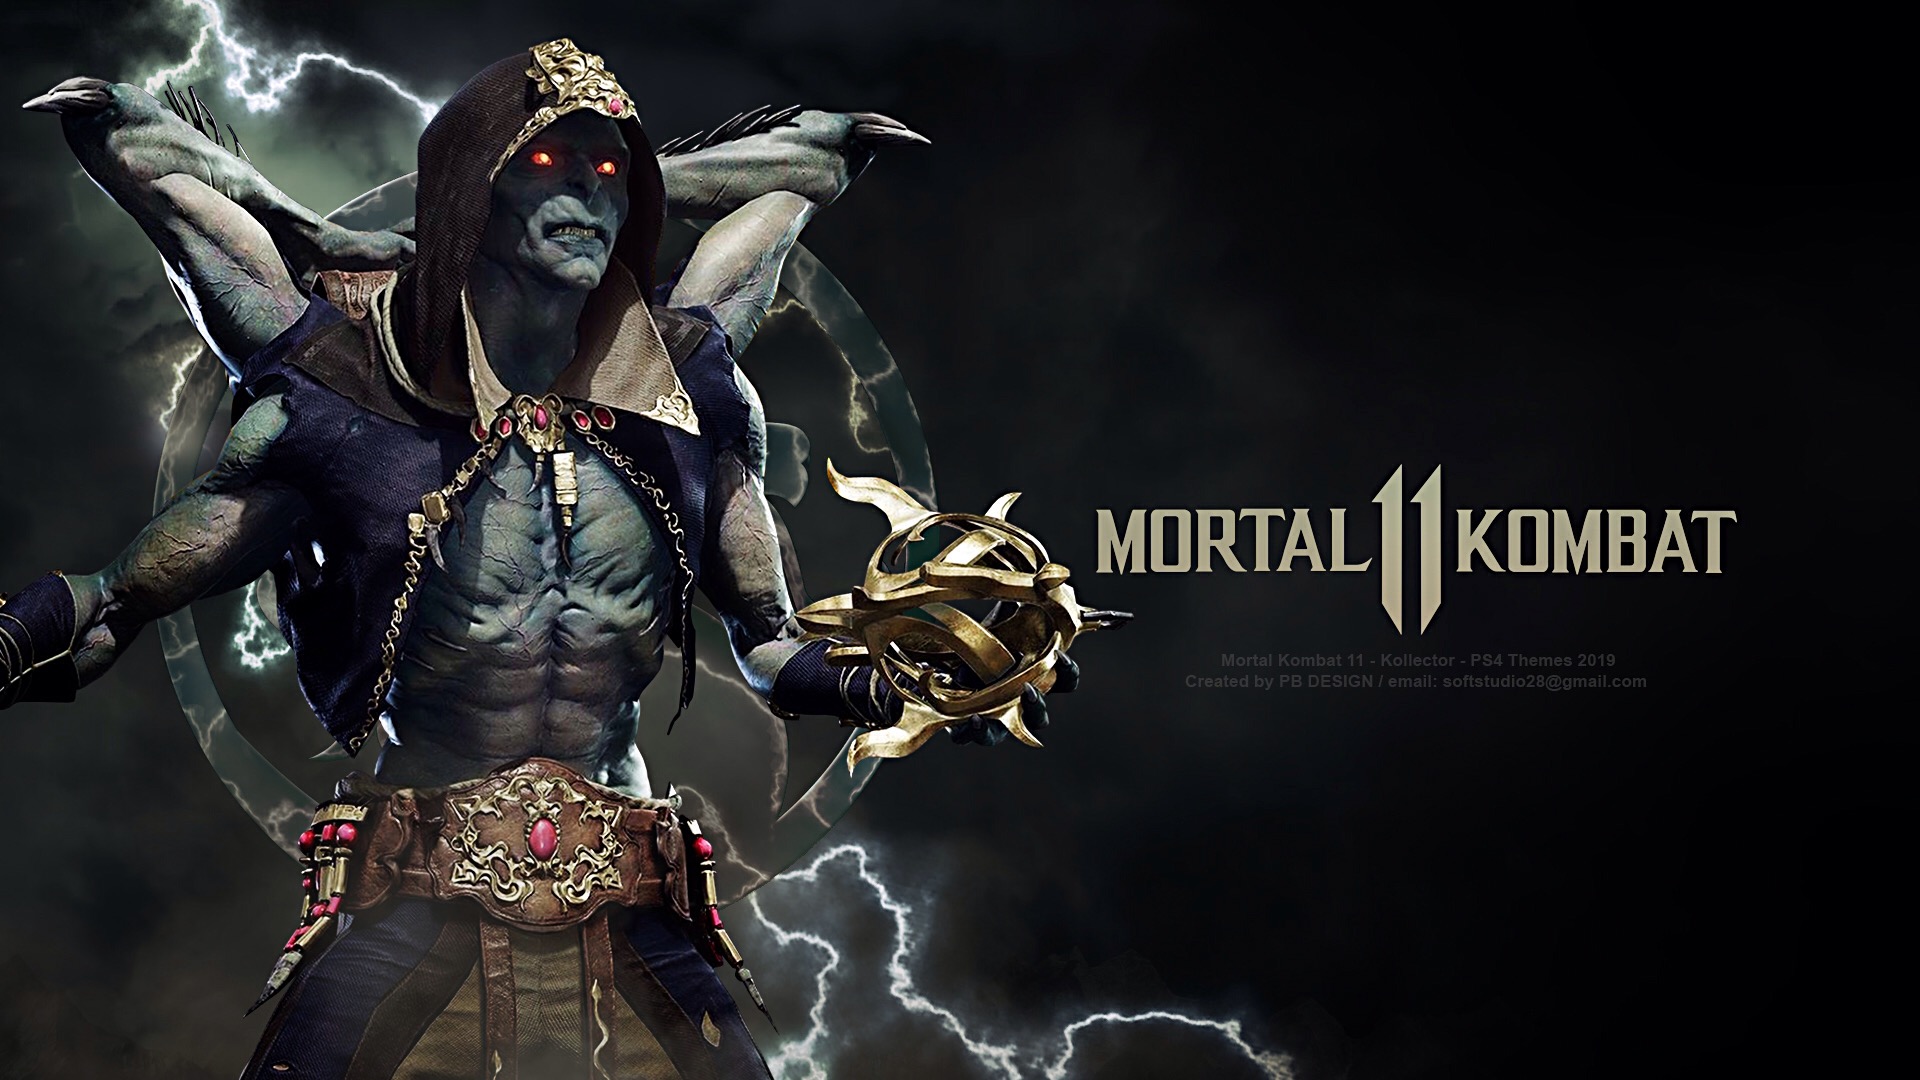 MK11   Kollector   PS4 Themes   by PBD by PBDesign28 1920x1080